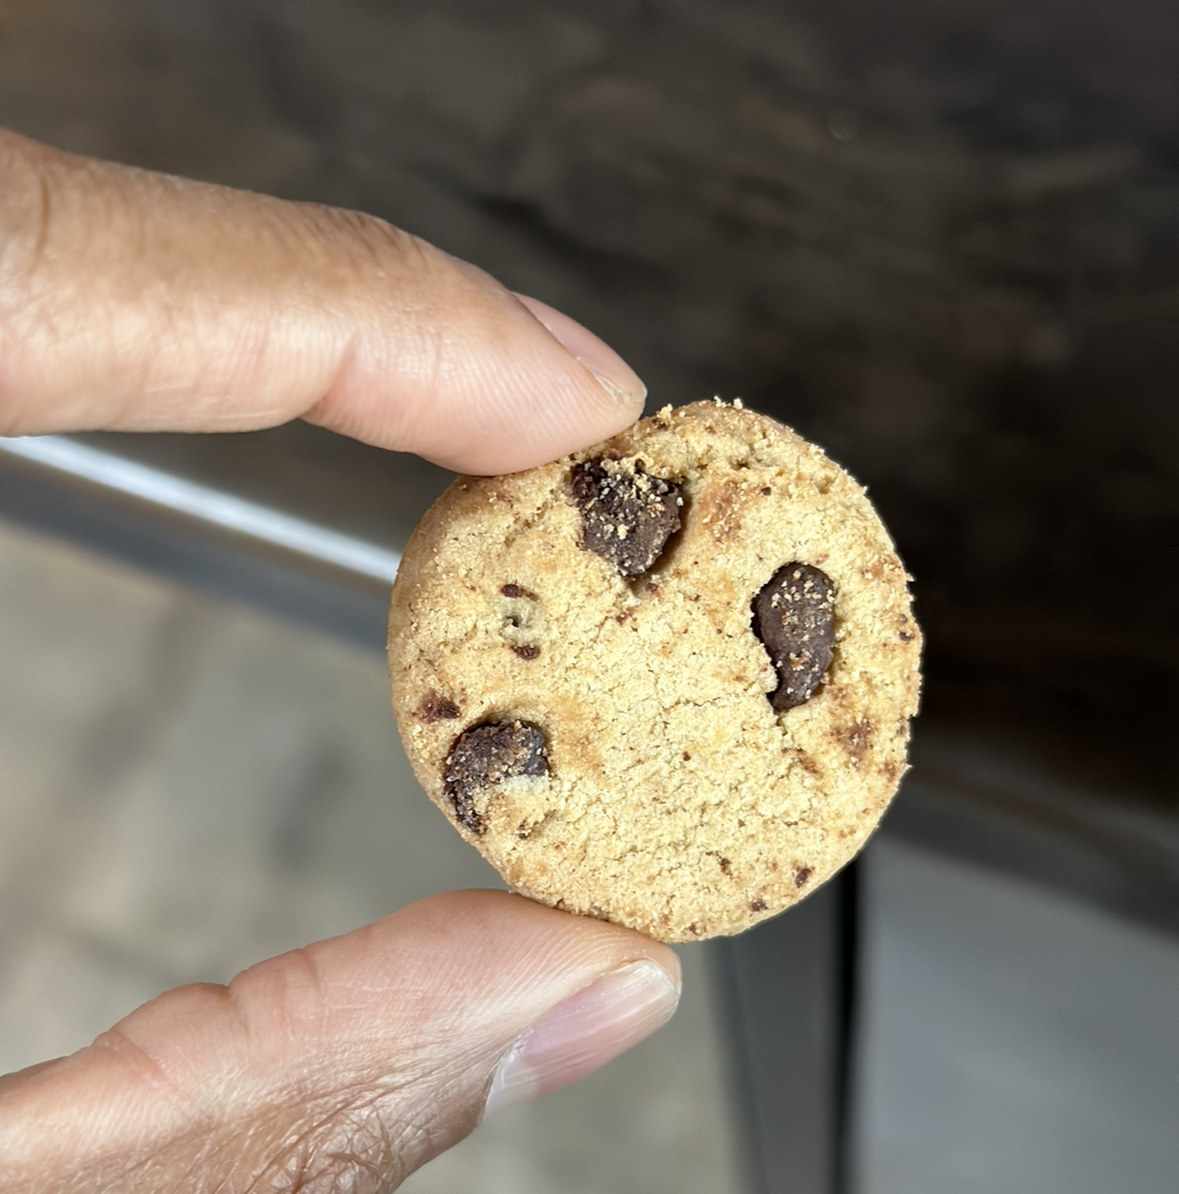 A hand holding one Famous Amos bite-size cookie